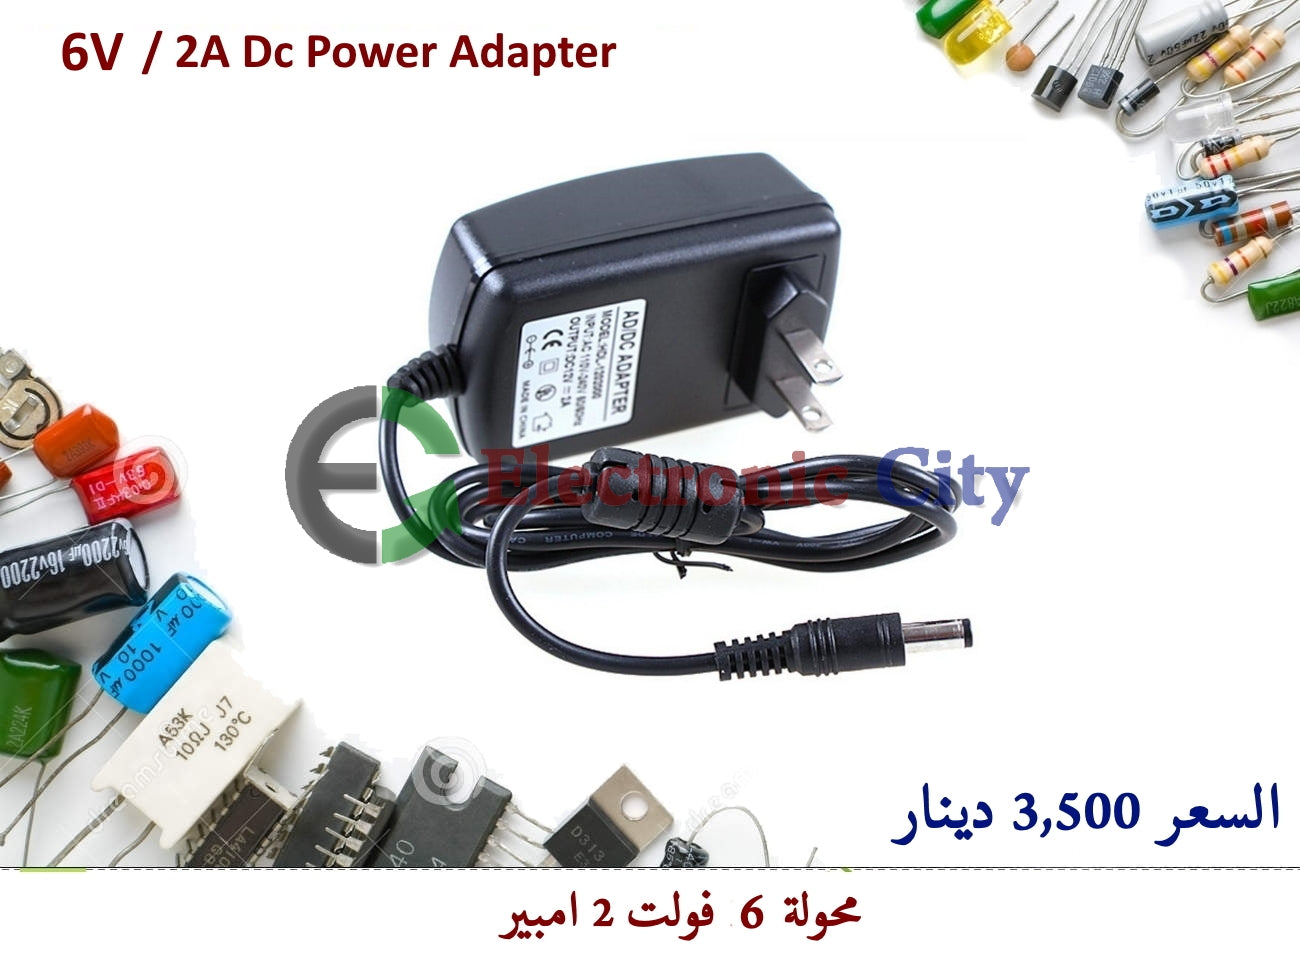 6v / 2A Dc Power Adapter #P12